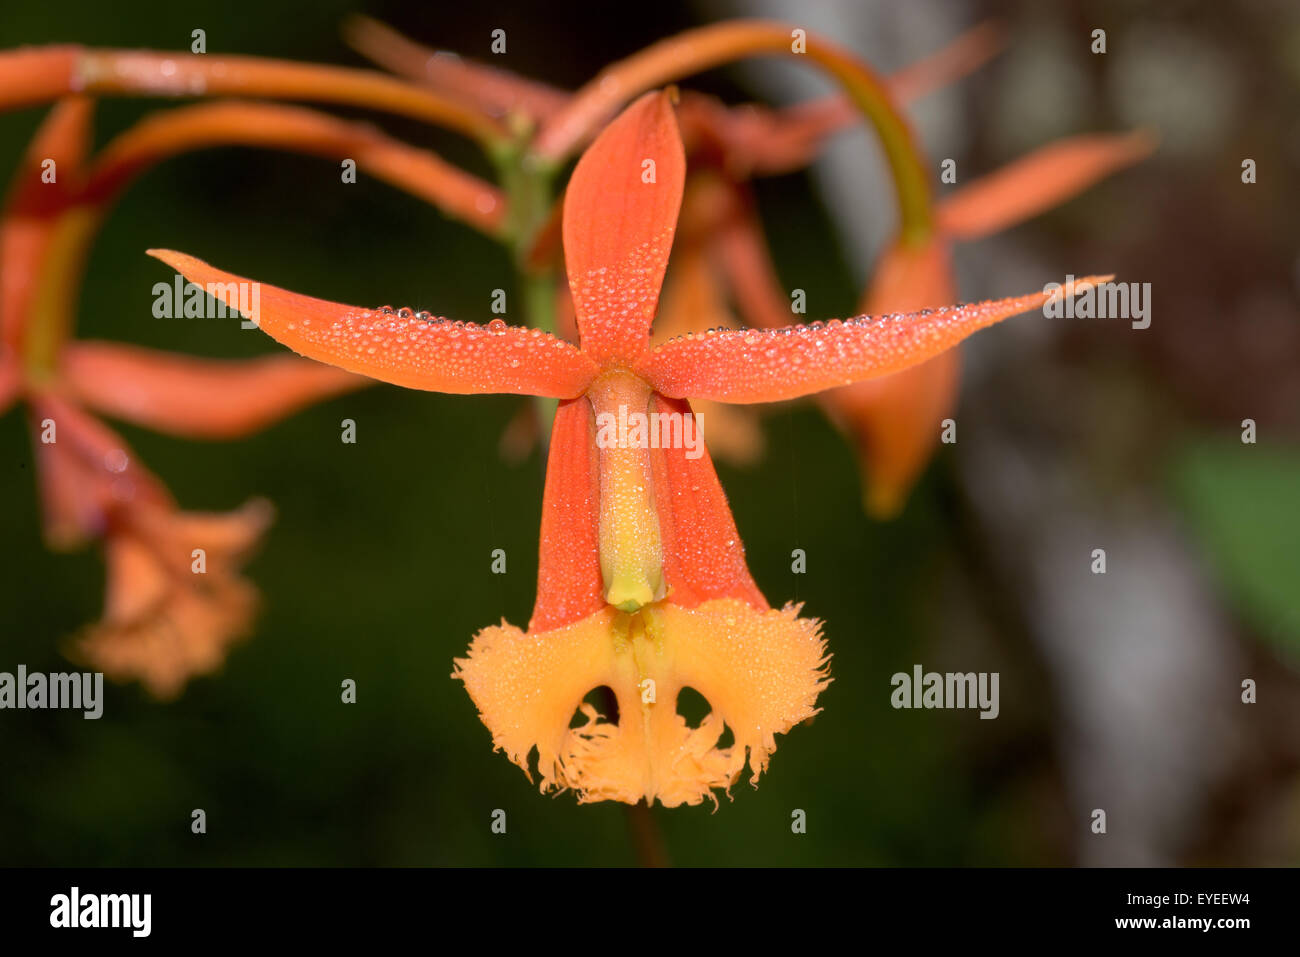 South American Star Orchid (Epidendrum ibaguense), Peru Stock Photo